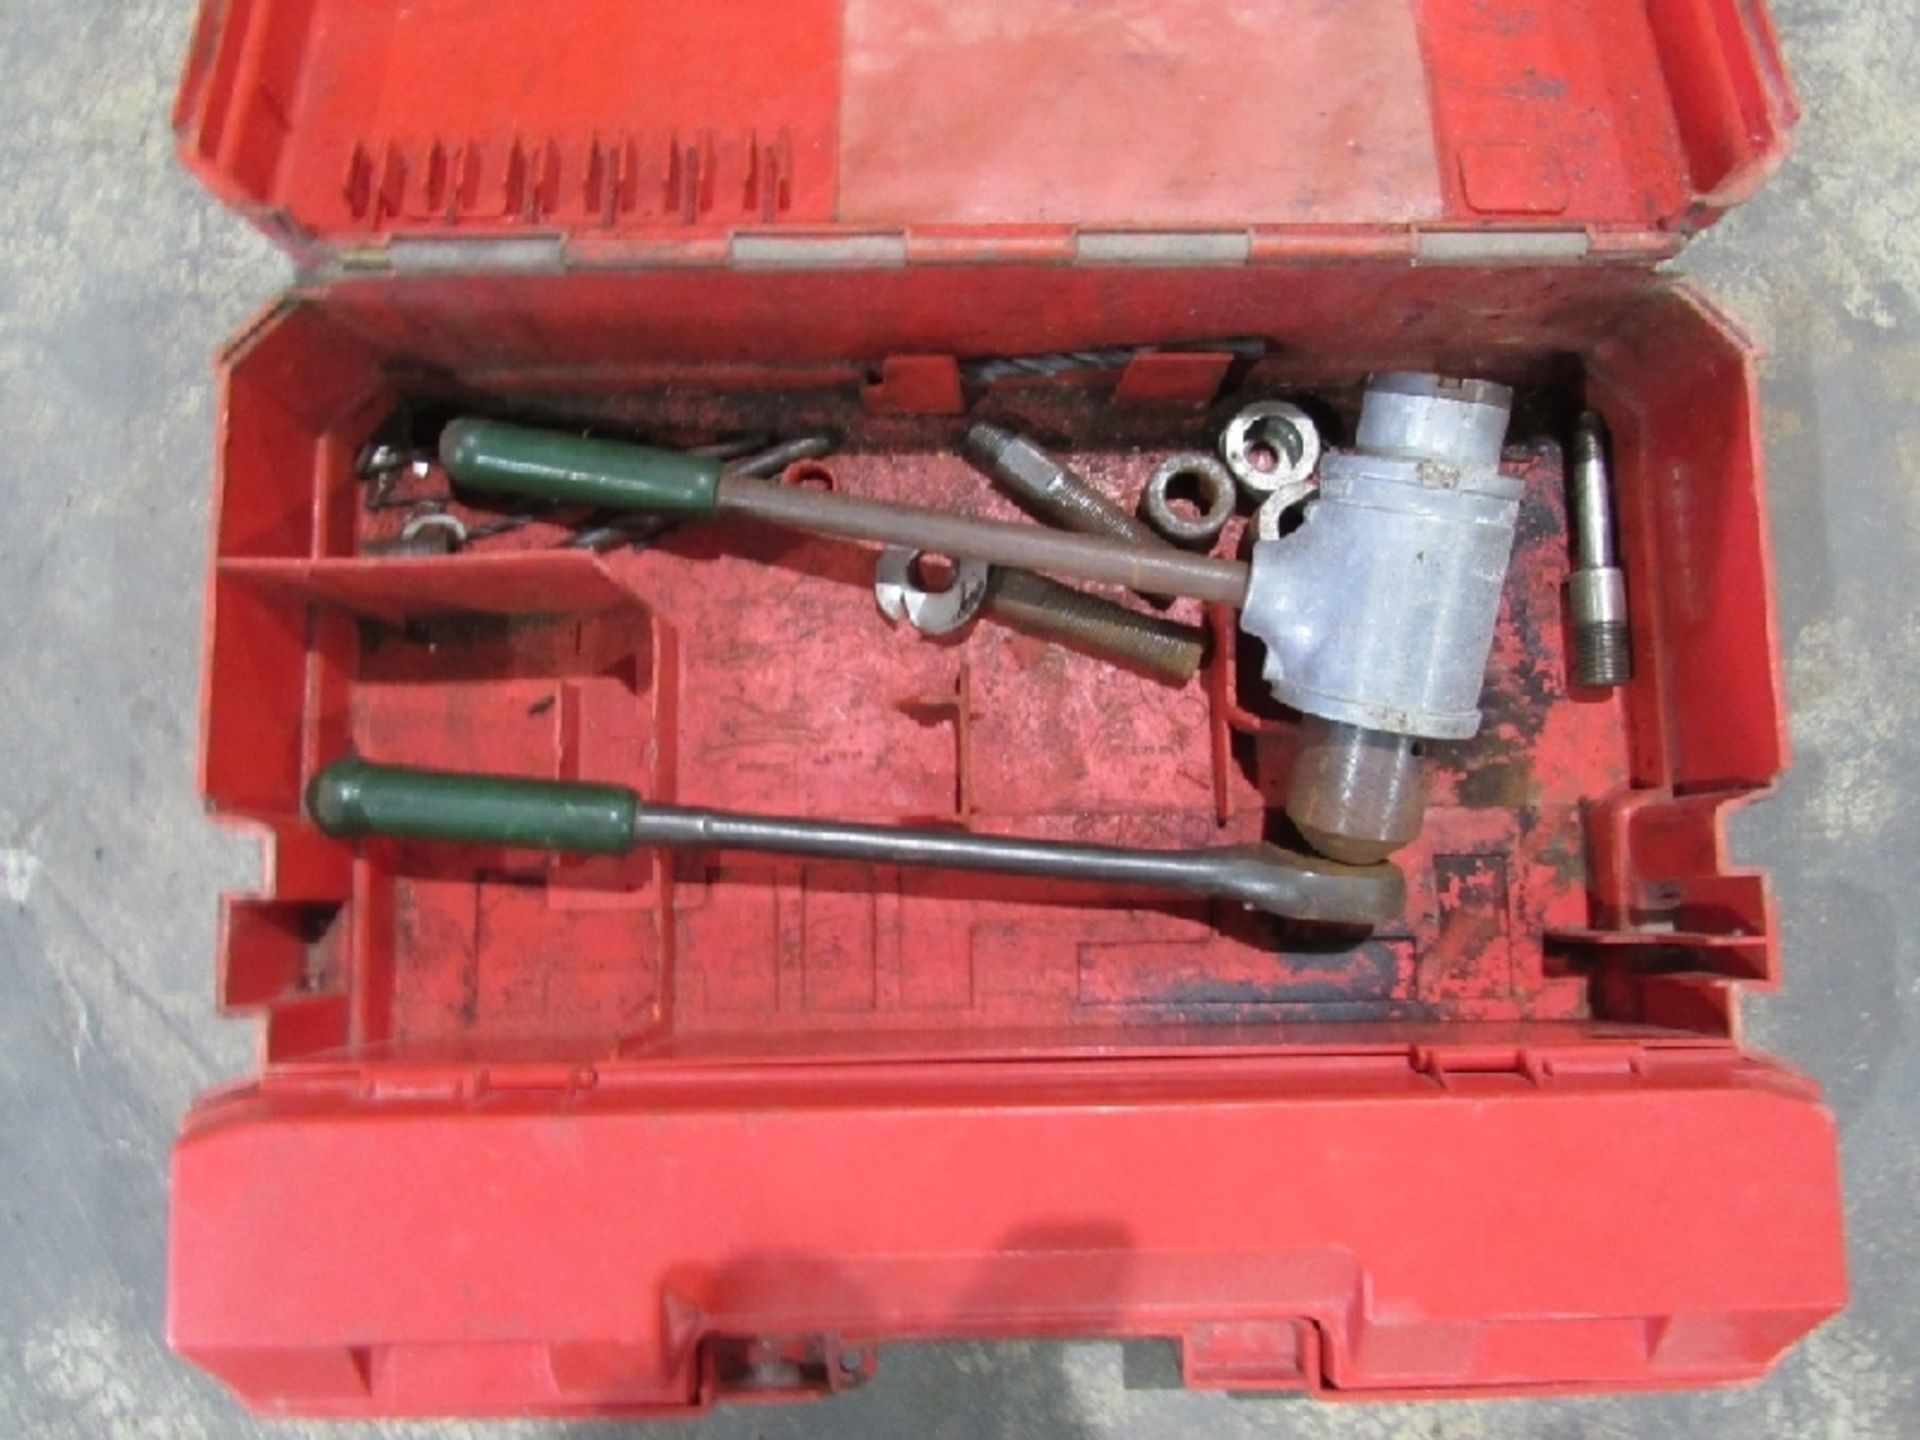 Greenlee Ratchet Knockout Tool- ***Located in Chattanooga, TN*** MFR - Greenlee Model - Unknown 3/